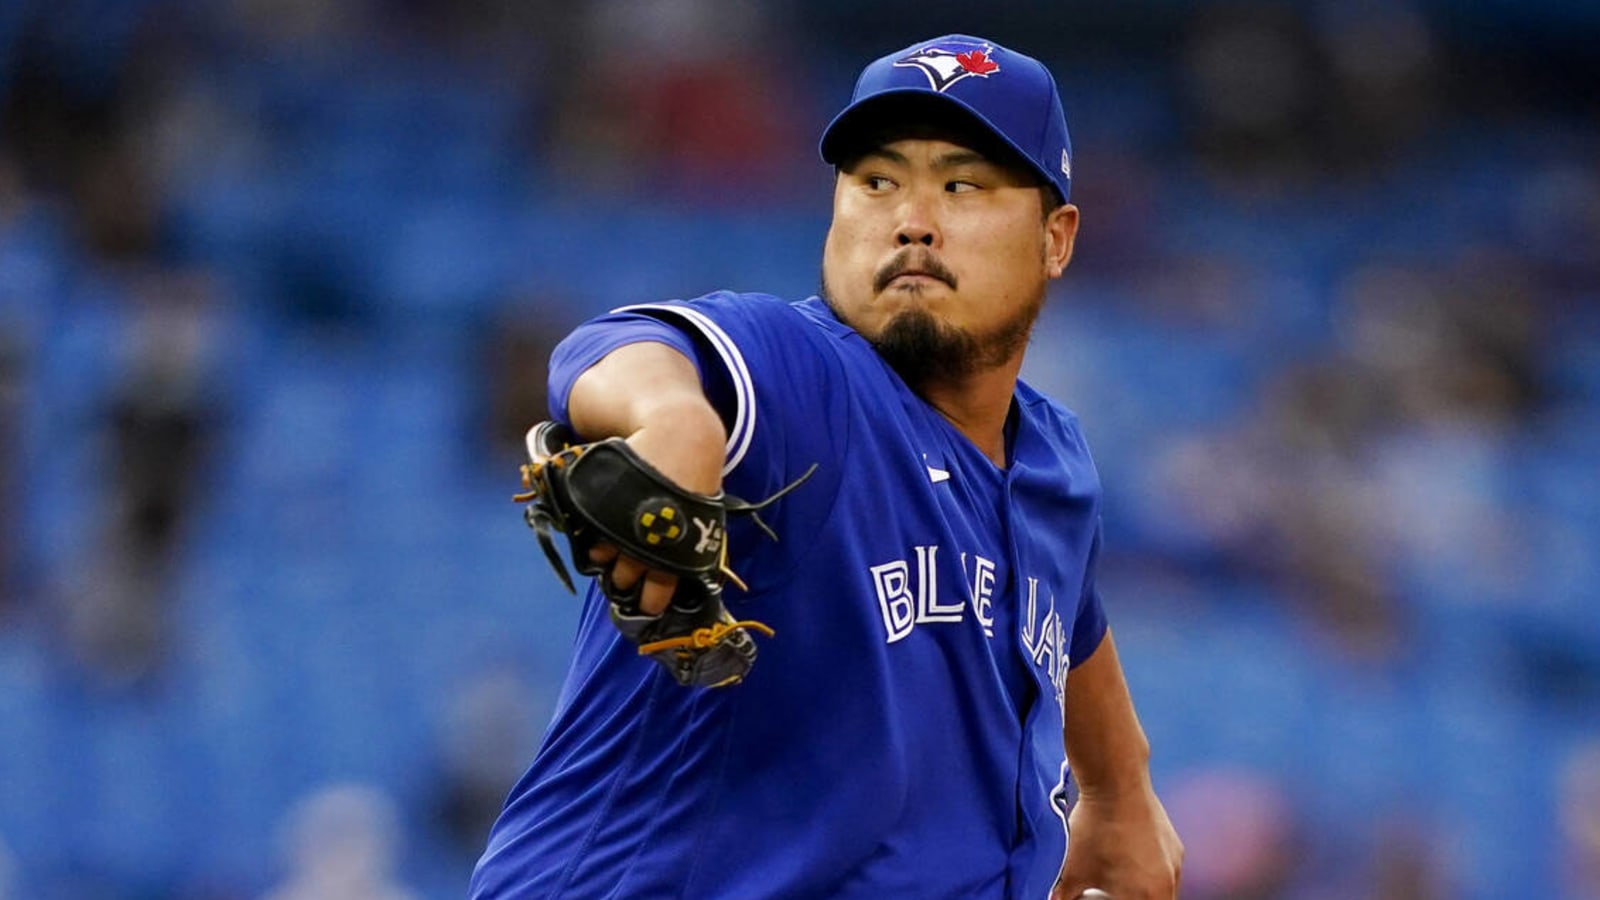 Blue Jays pitcher Hyun Jin Ryu done for the year